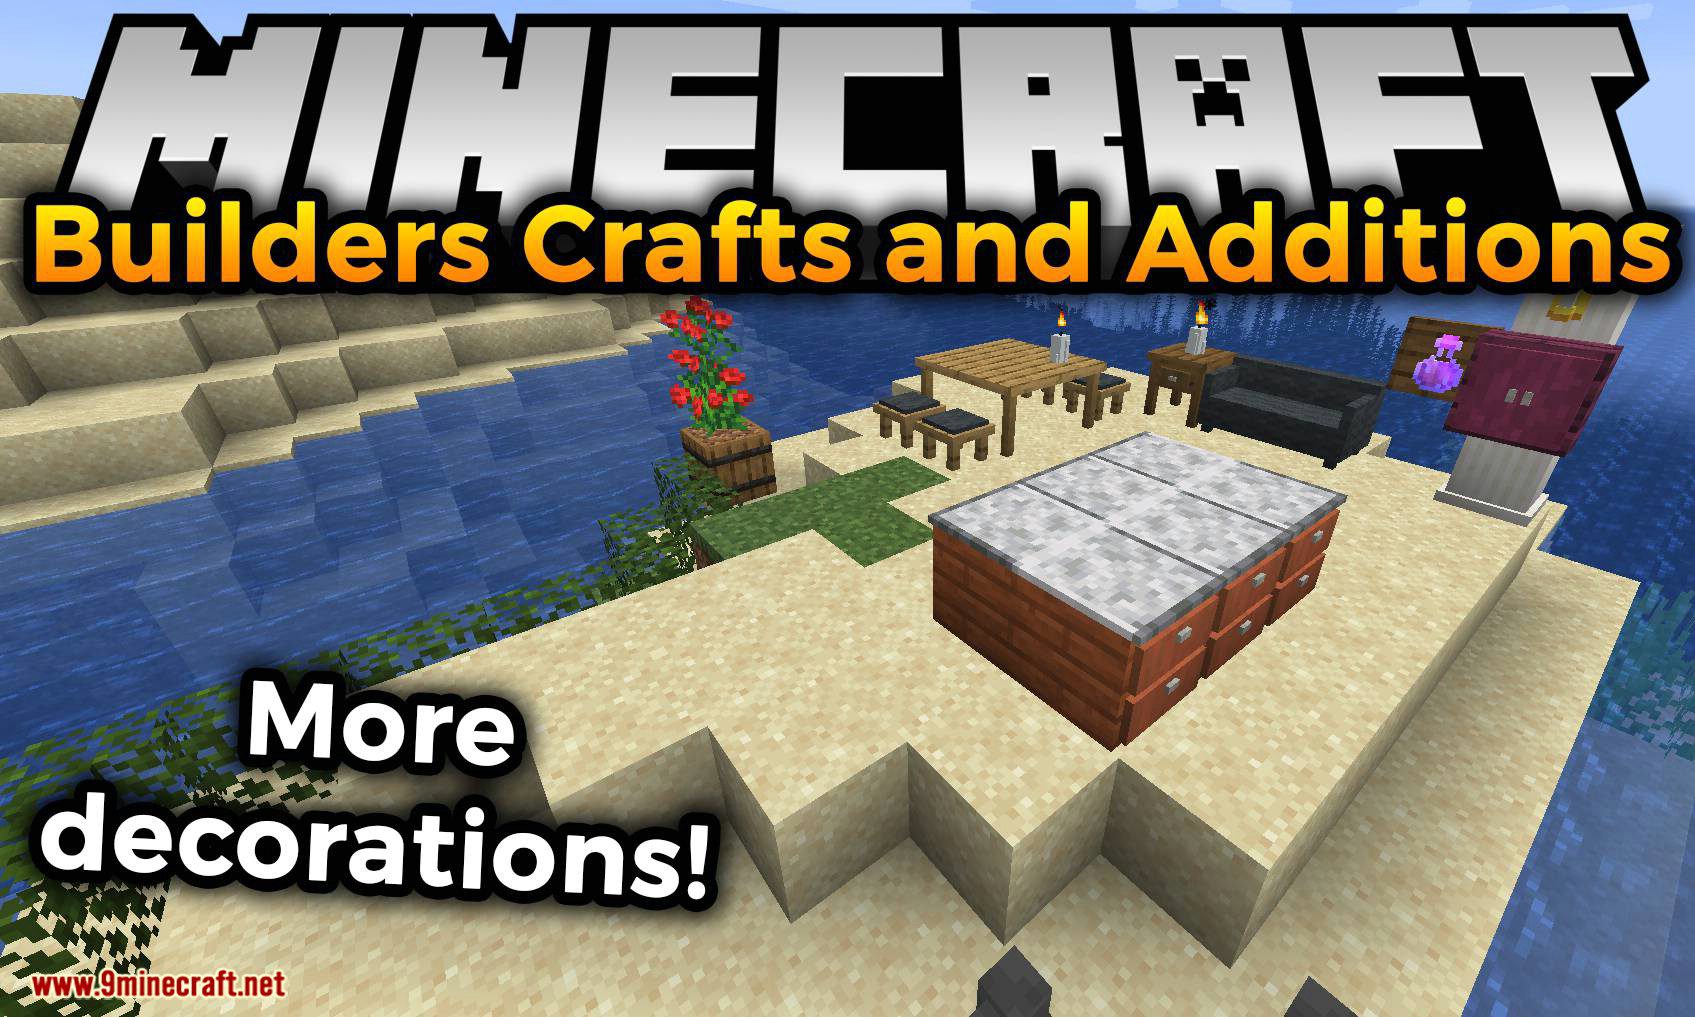 Builders Crafts Additions Mod 1 19 1 1 18 2 Too Many Decorations 9minecraft Net